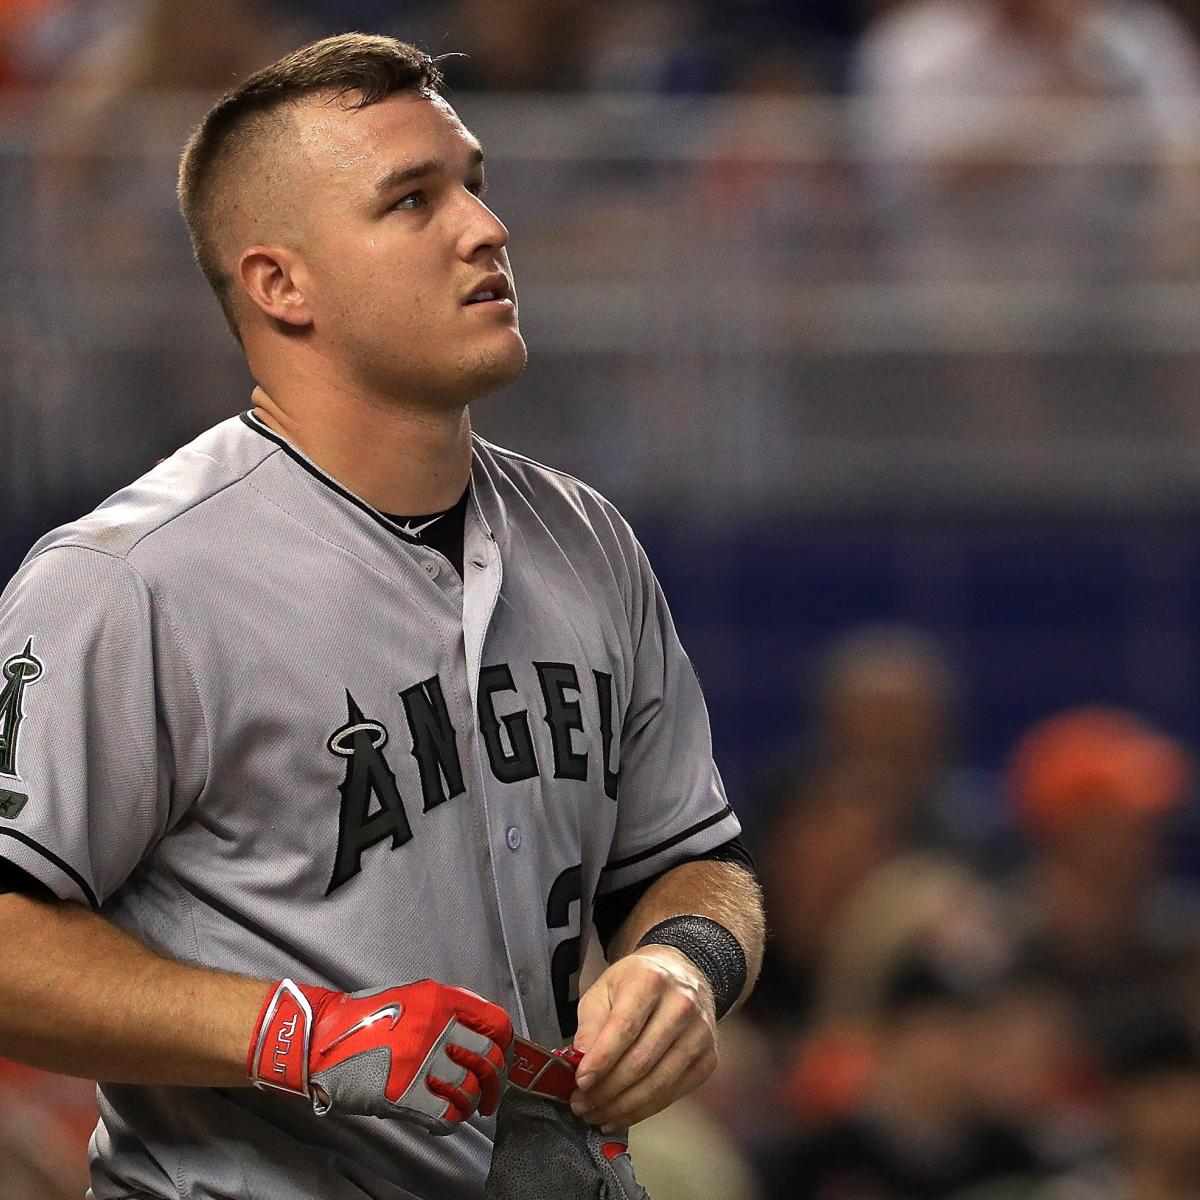 Mike Trout Haircut Mike Trout The Mlb Rookie Super Star Mike Trout Trout Bobby Brown